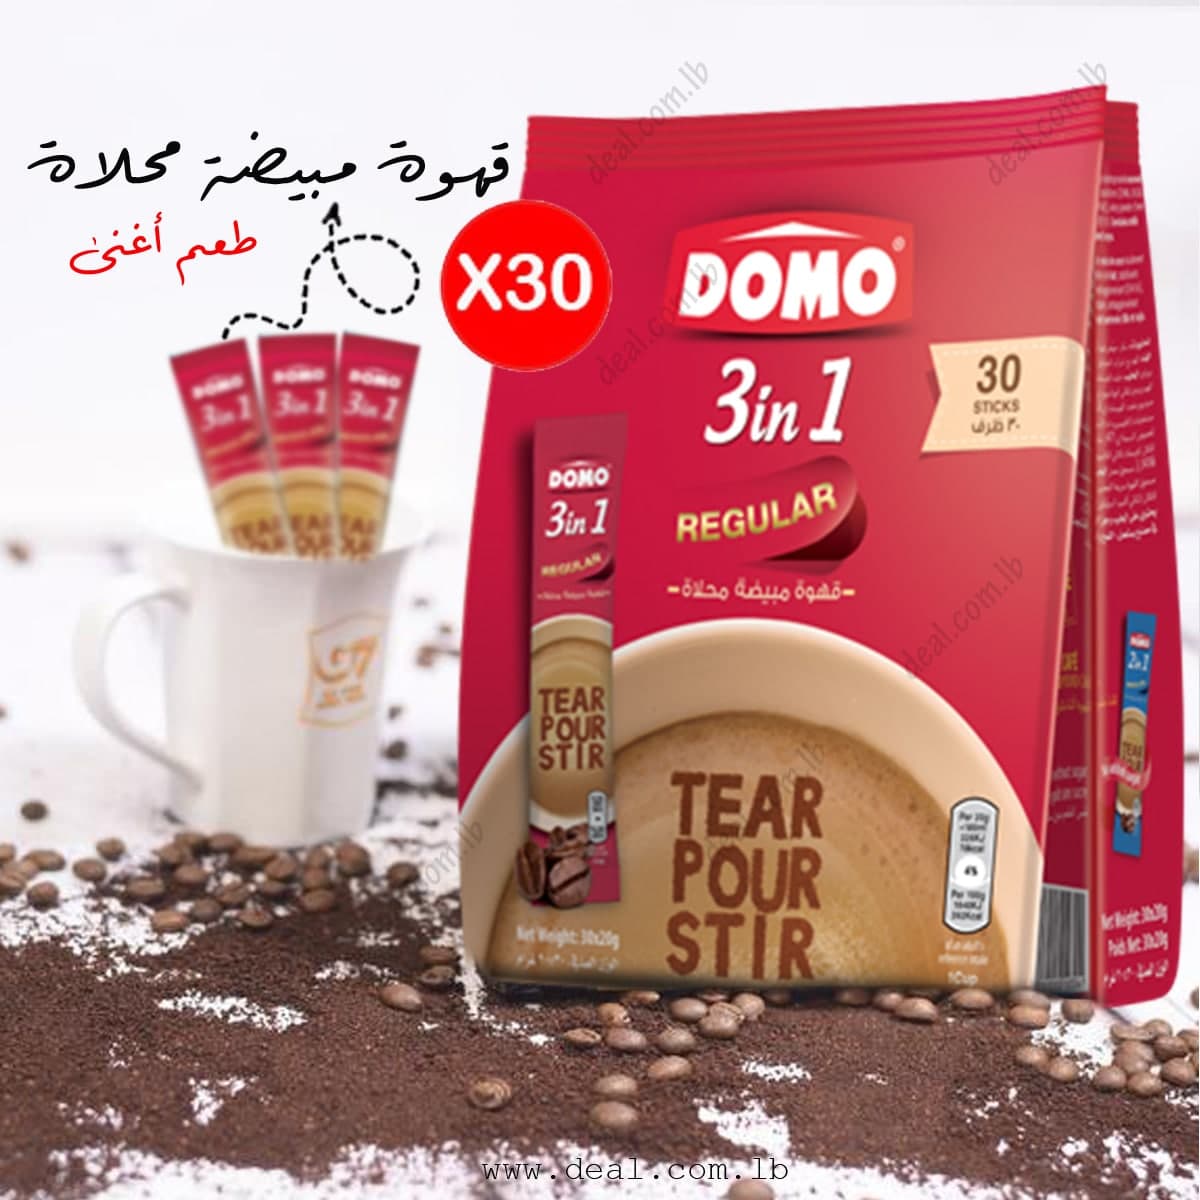 DOMO+INSTANT+COFFEE+3+IN+1+30pcs+18G